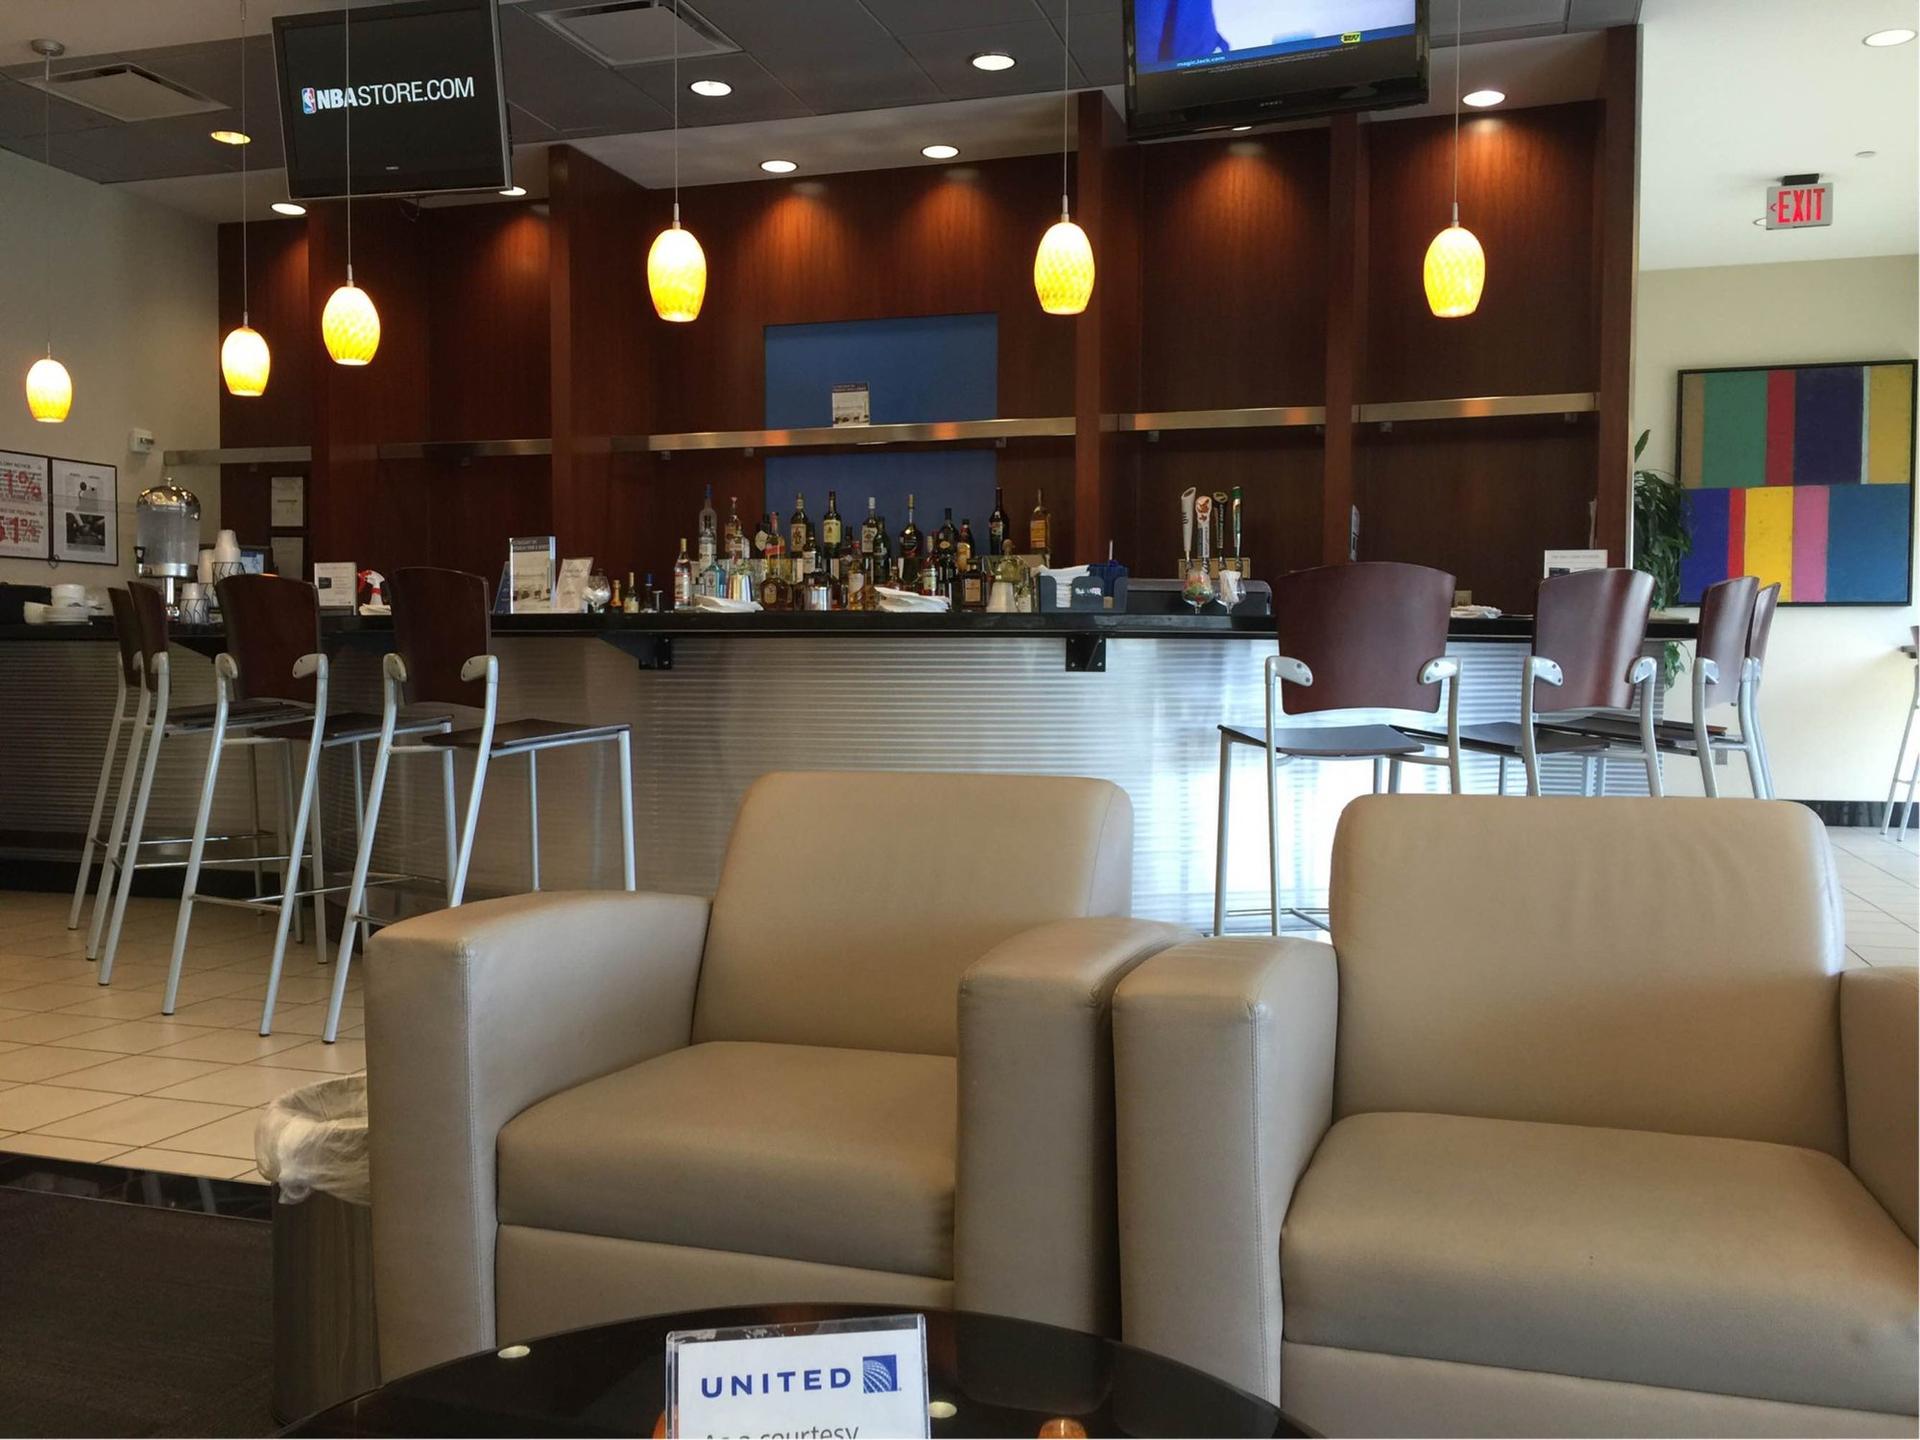 United Airlines United Club image 1 of 3